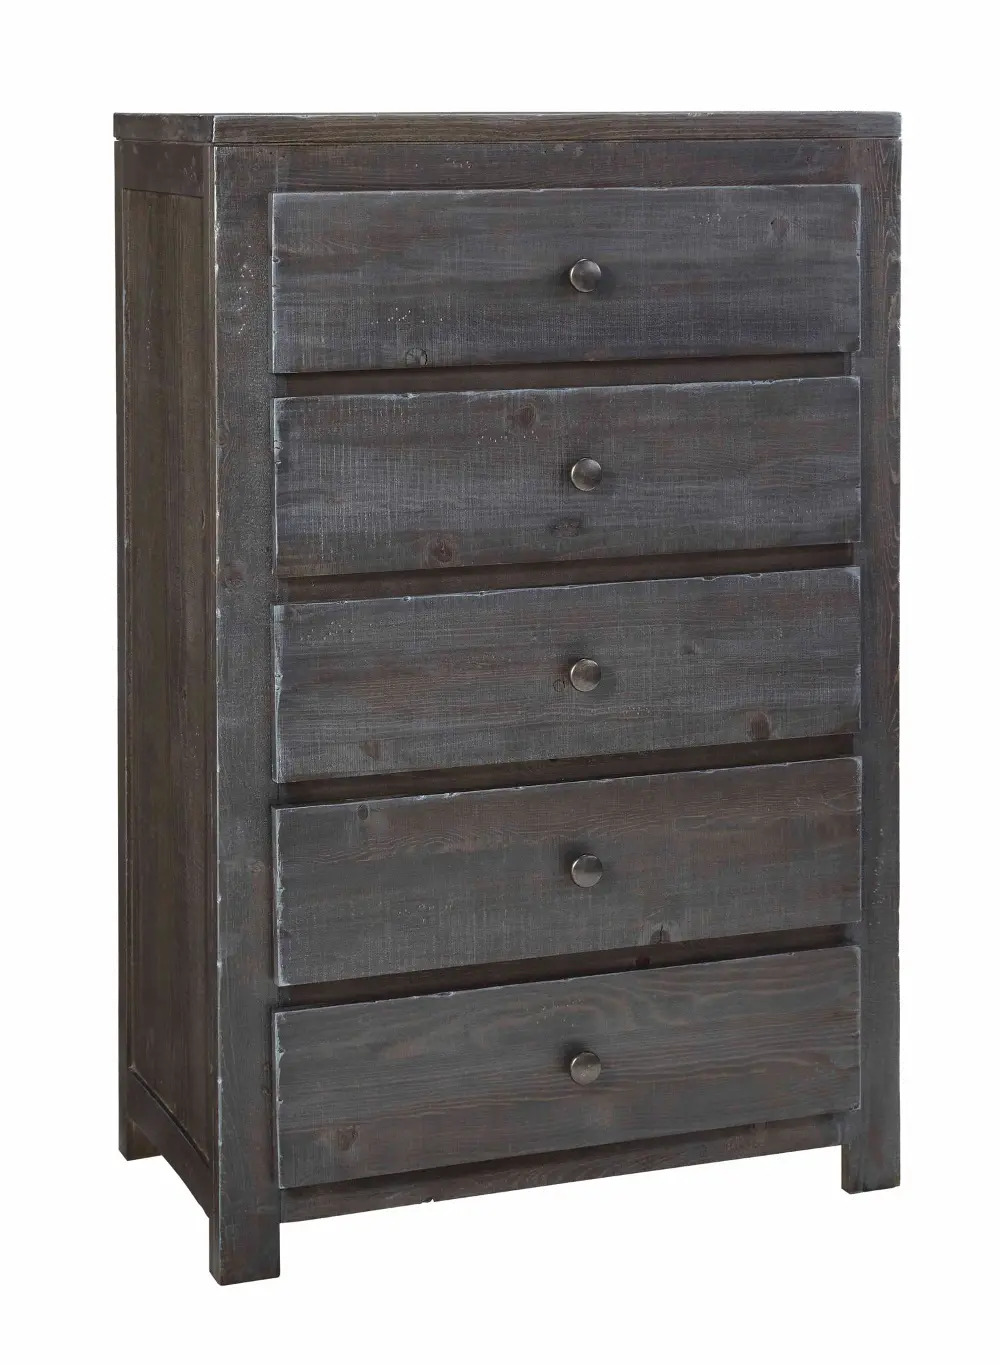 Rustic Charcoal Gray Chest of Drawers - Wheaton-1